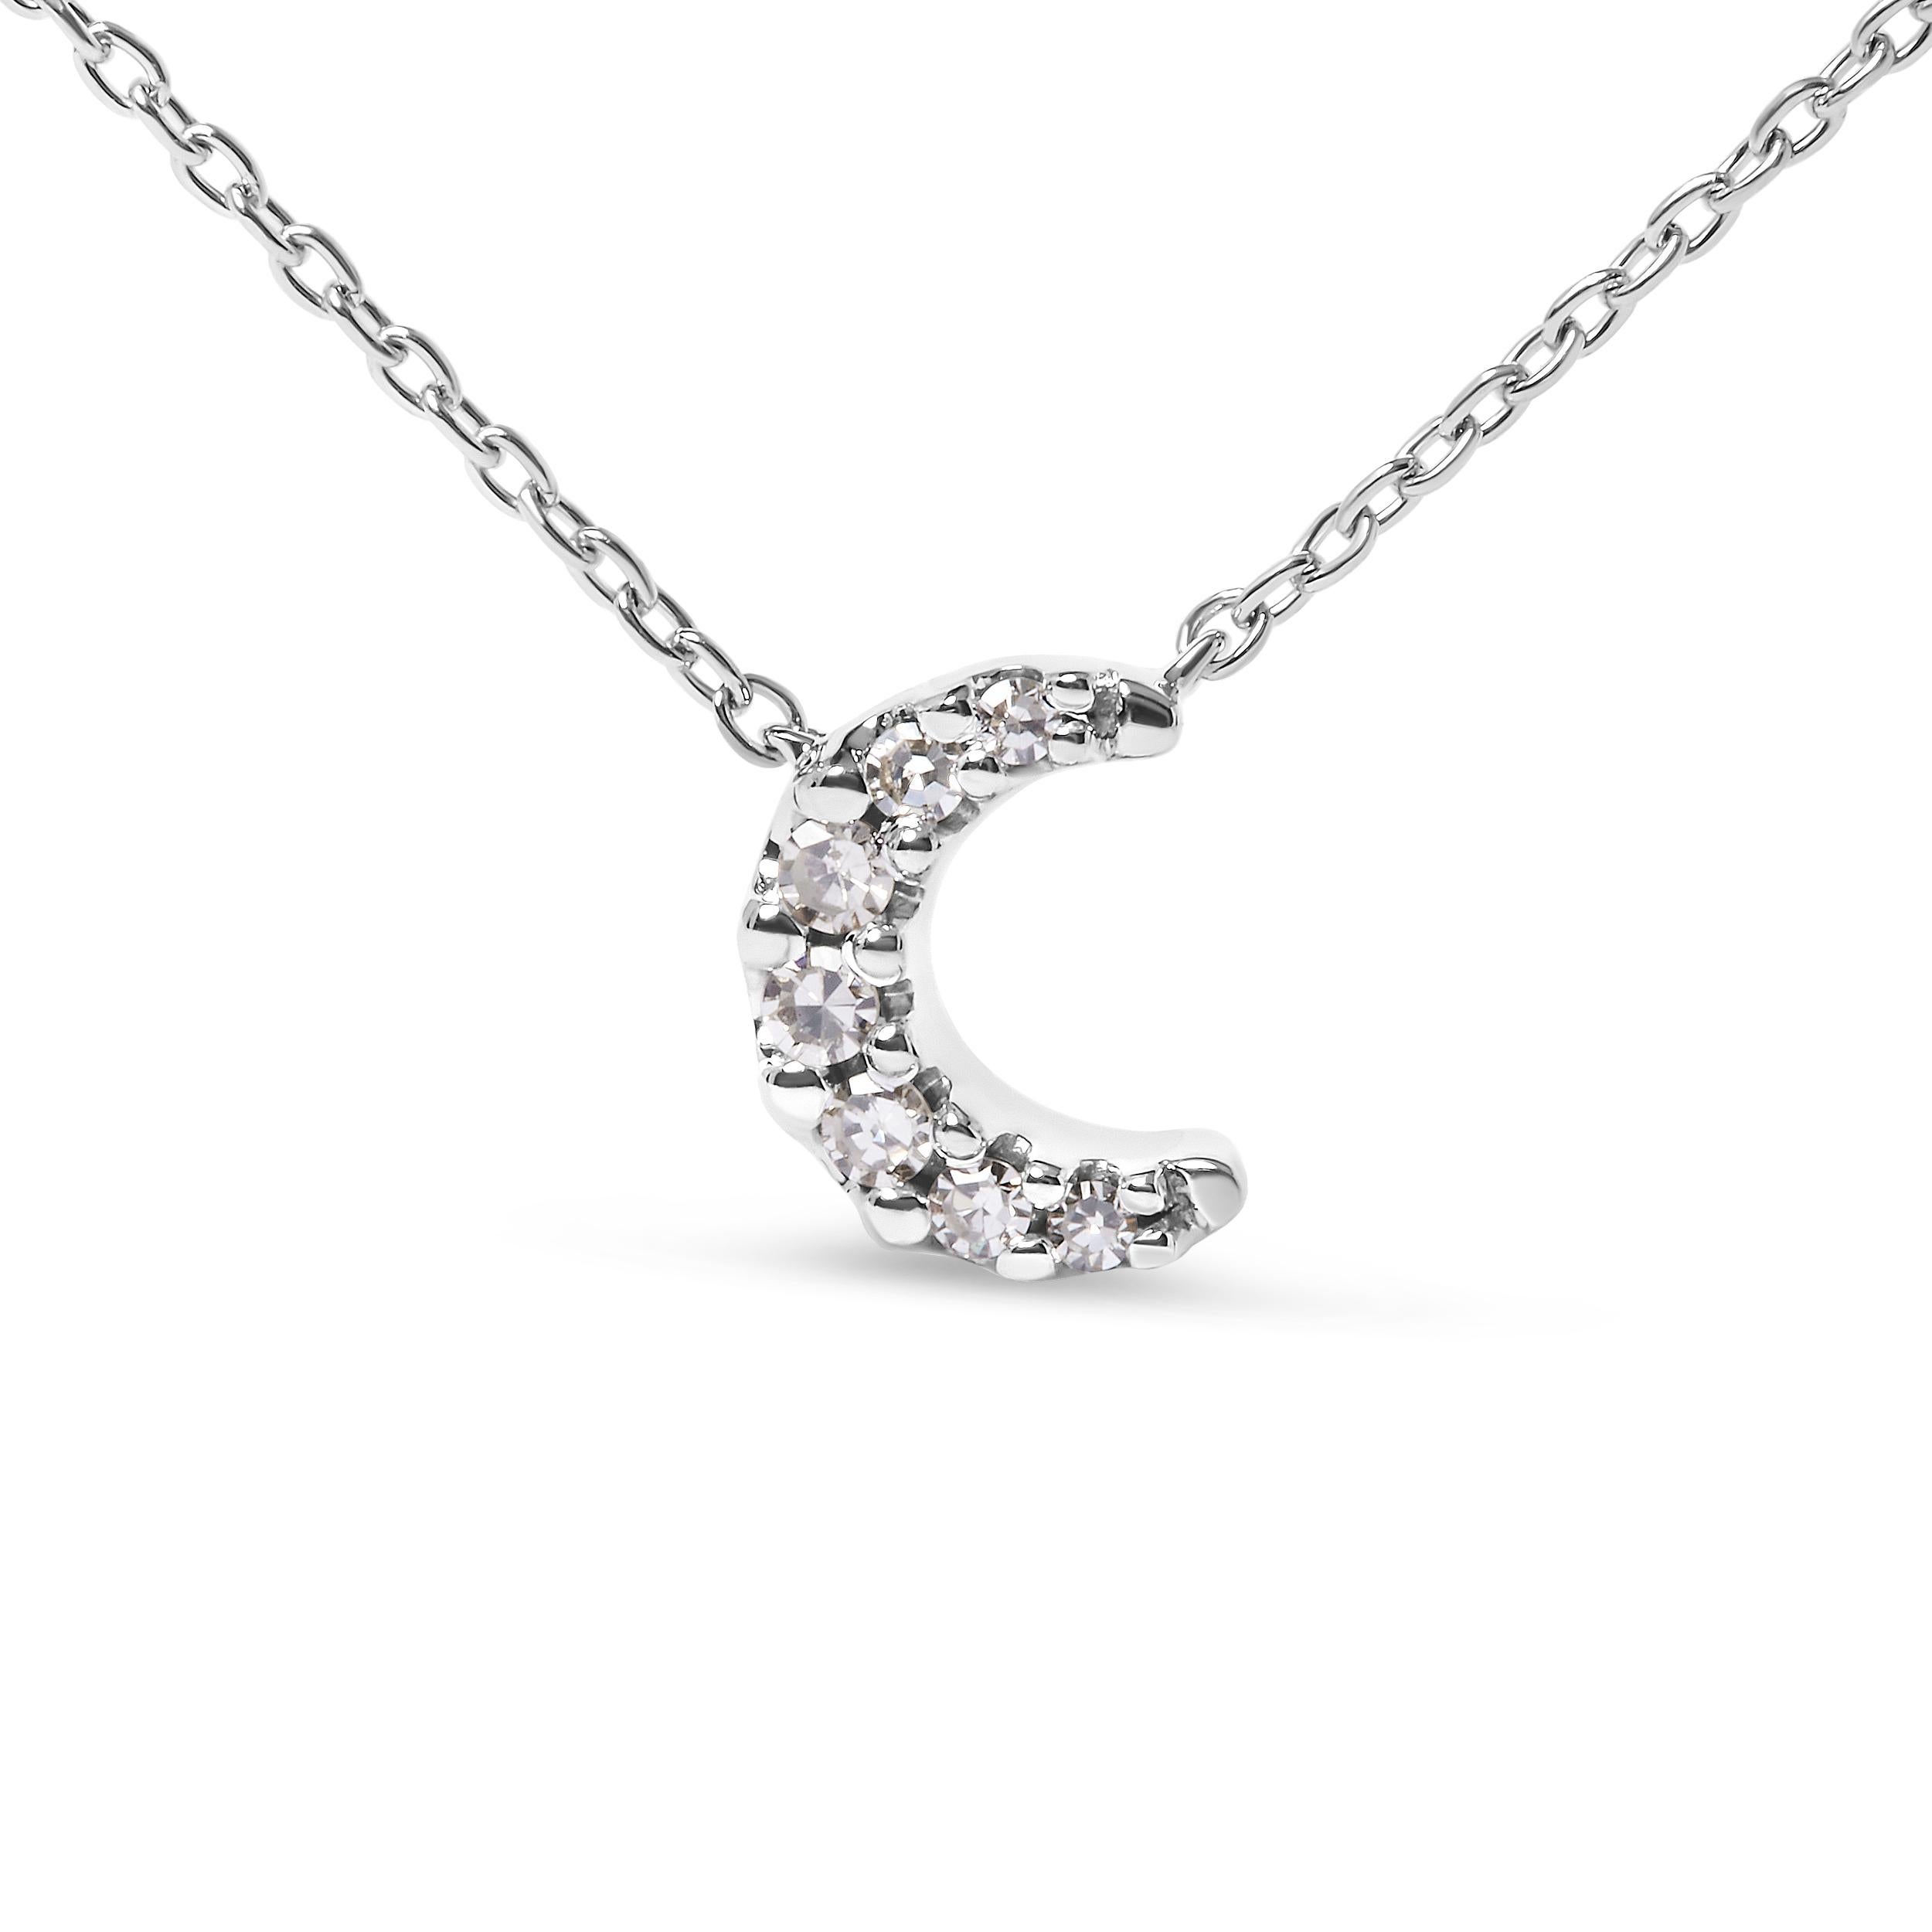 Introducing a celestial masterpiece that will captivate your heart and illuminate your style. This exquisite 10K White Gold Pendant Necklace features a stunning Crescent Moon design, adorned with accented 7 dazzling diamonds. The diamonds, carefully